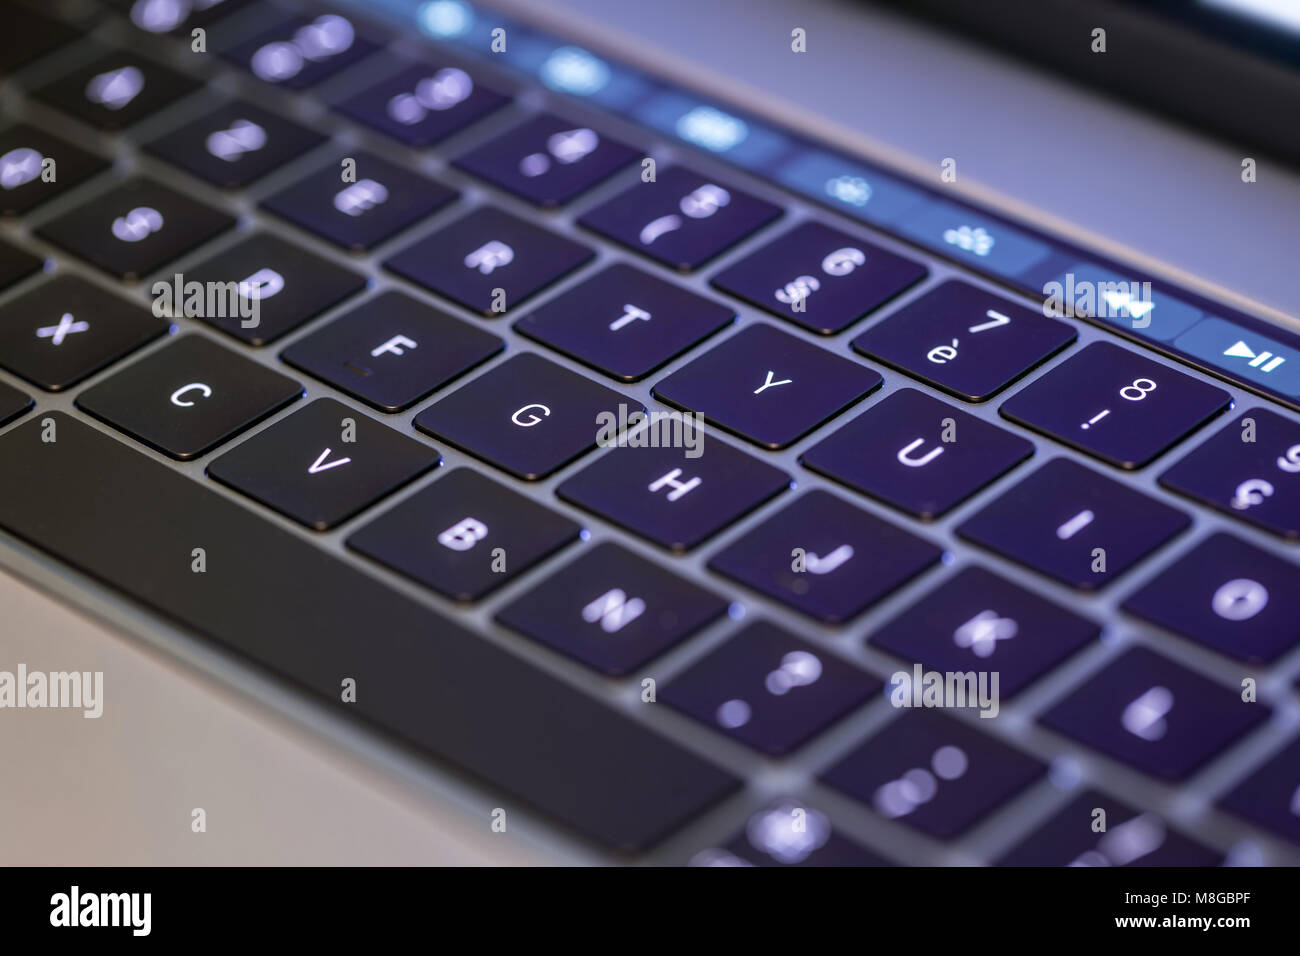 Bright keyboard and touch screen bar on metallic gray laptop Stock Photo